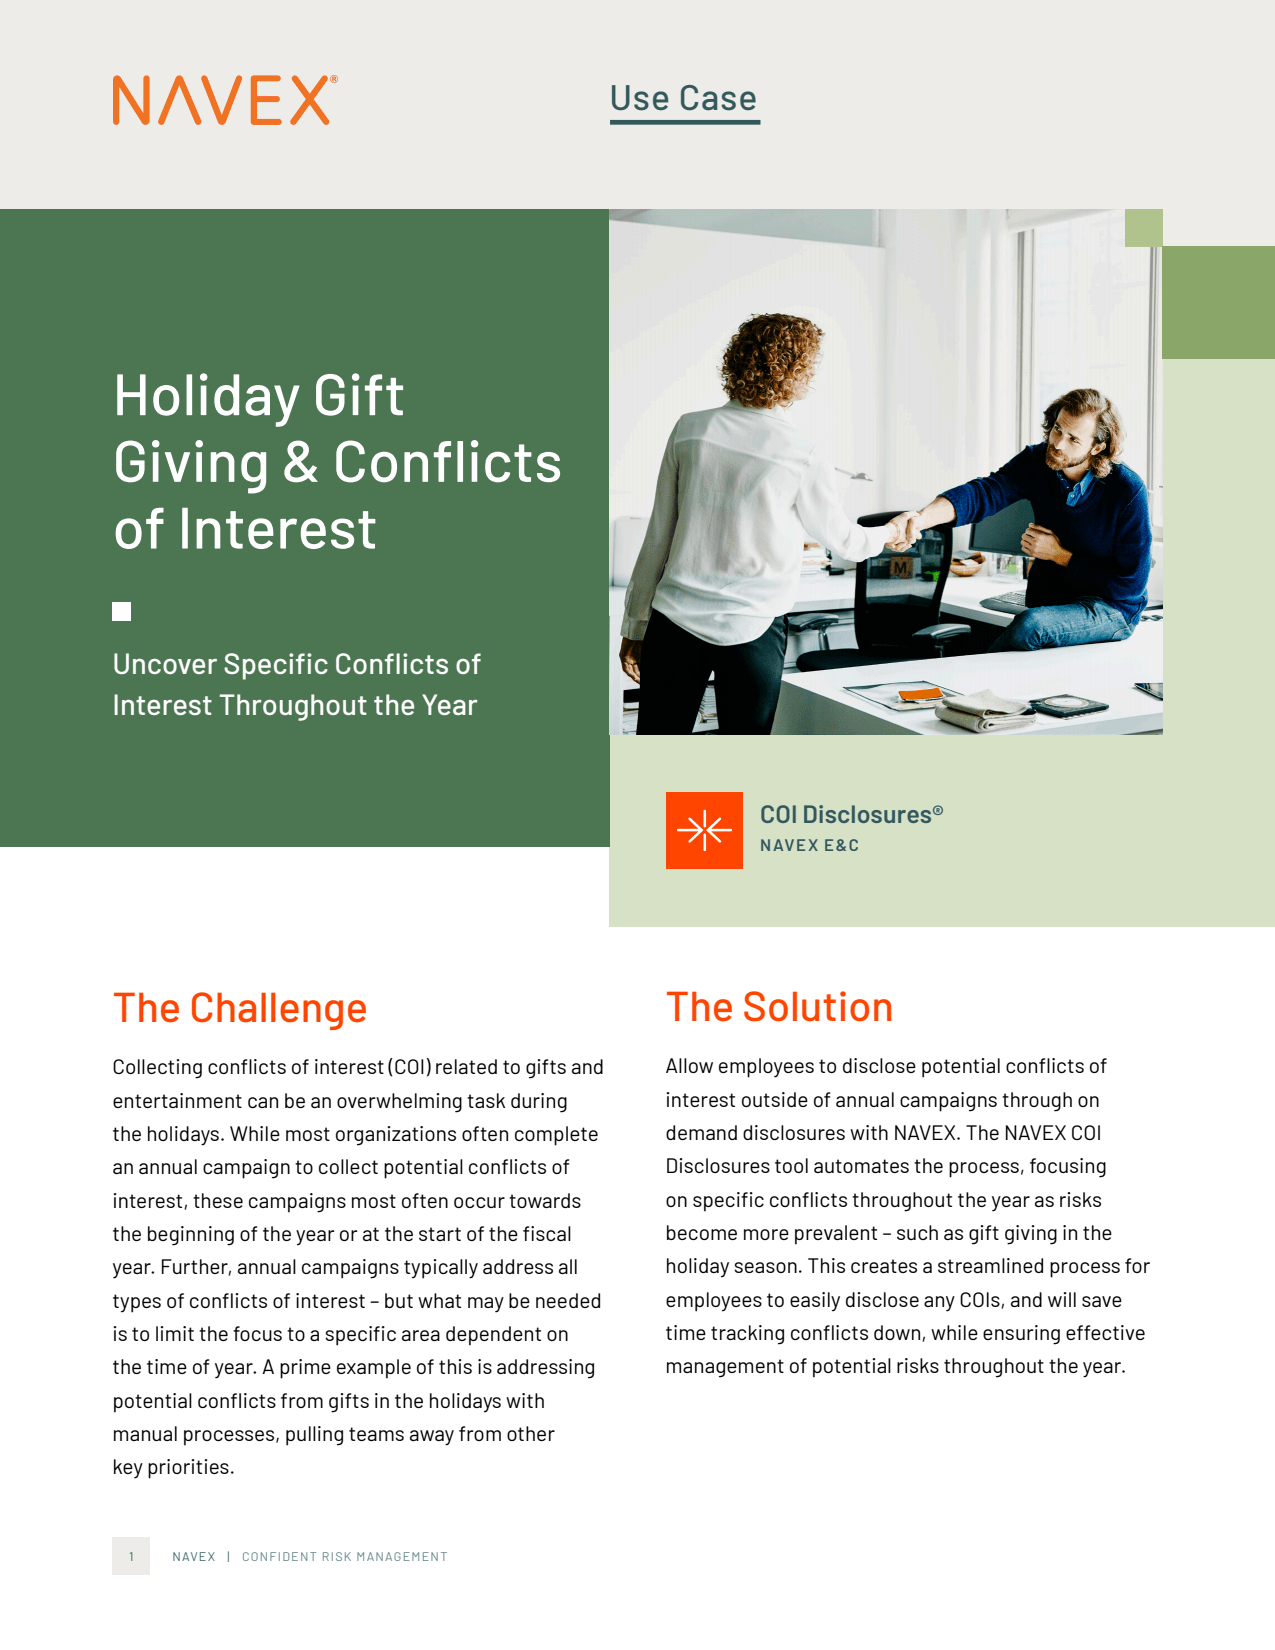 Holiday Gift Giving & Conflicts of Interest Use Case